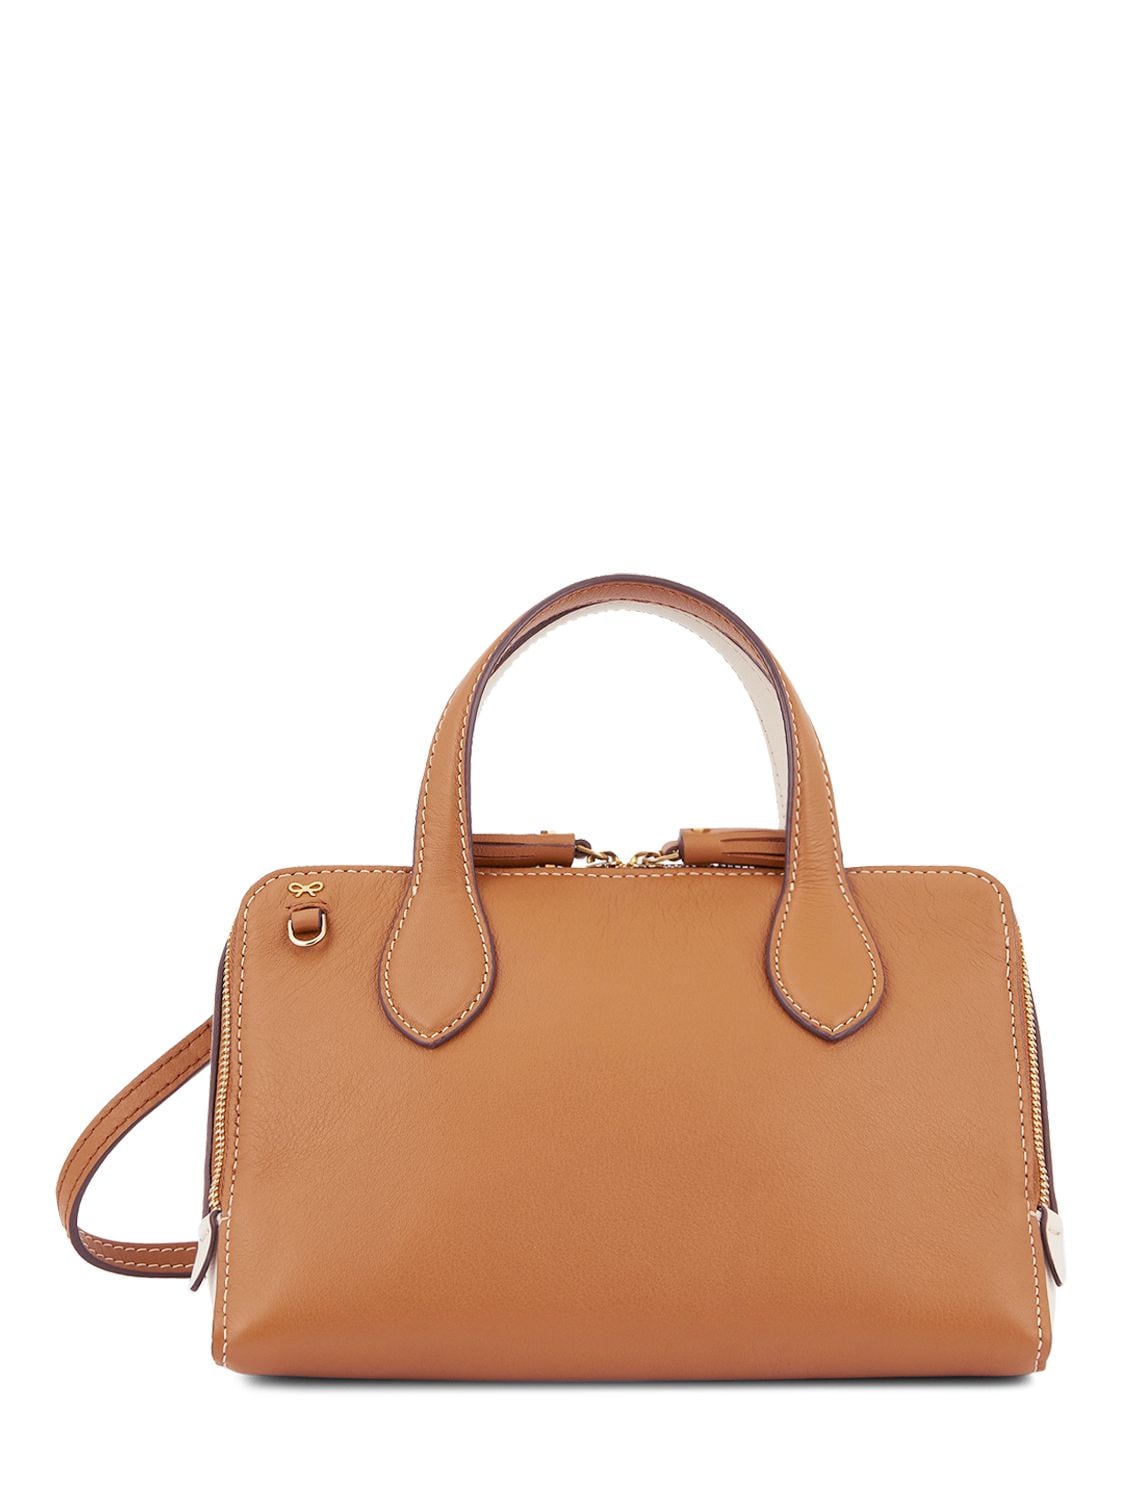 Anya Hindmarch The Small Wedge Leather Top Handle Bag In Chalk,tan ...